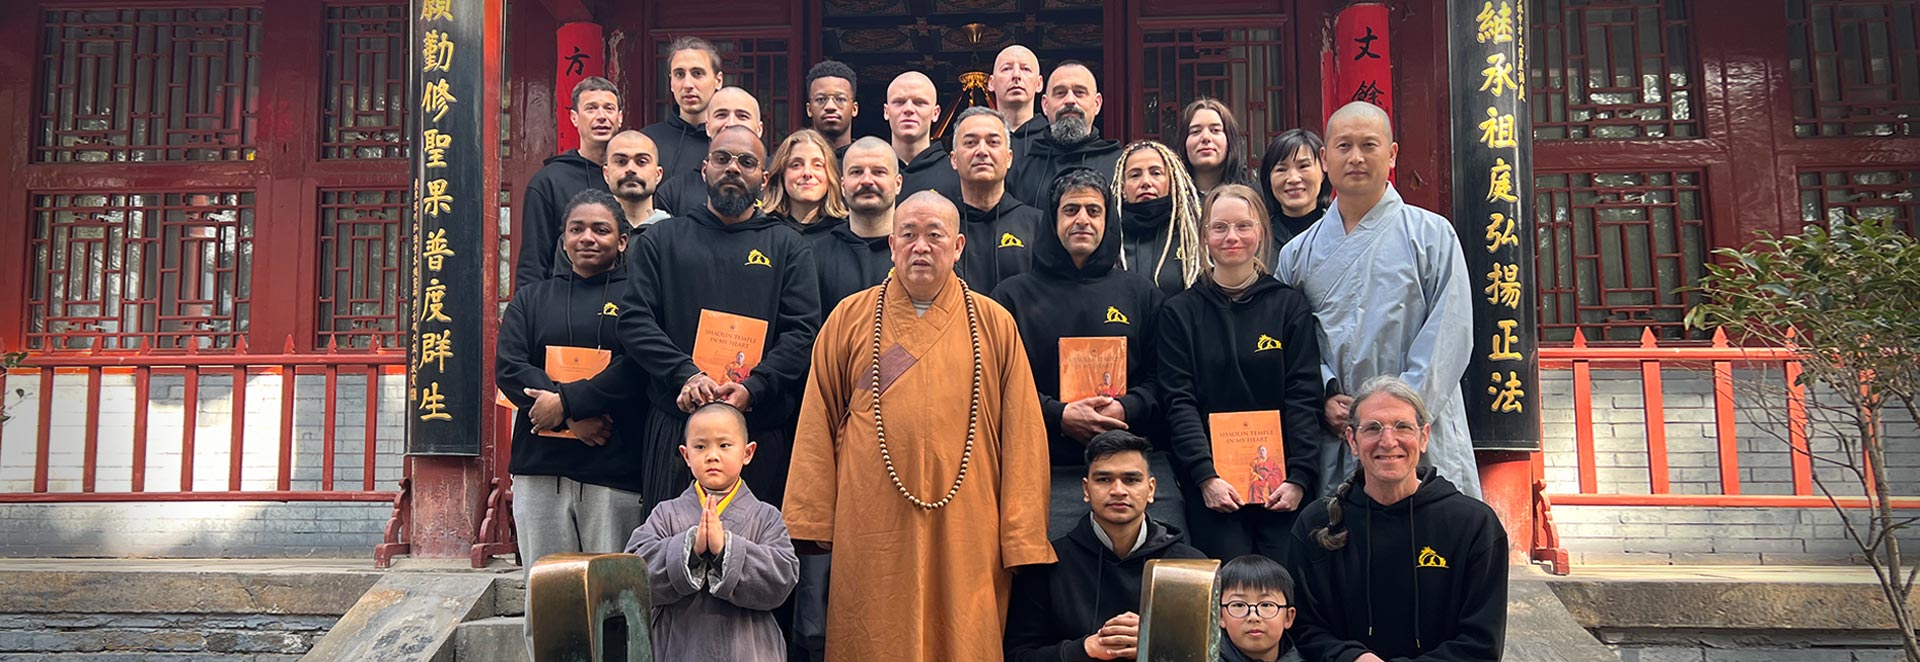 Return to the Shaolin Temple for pilgrimage